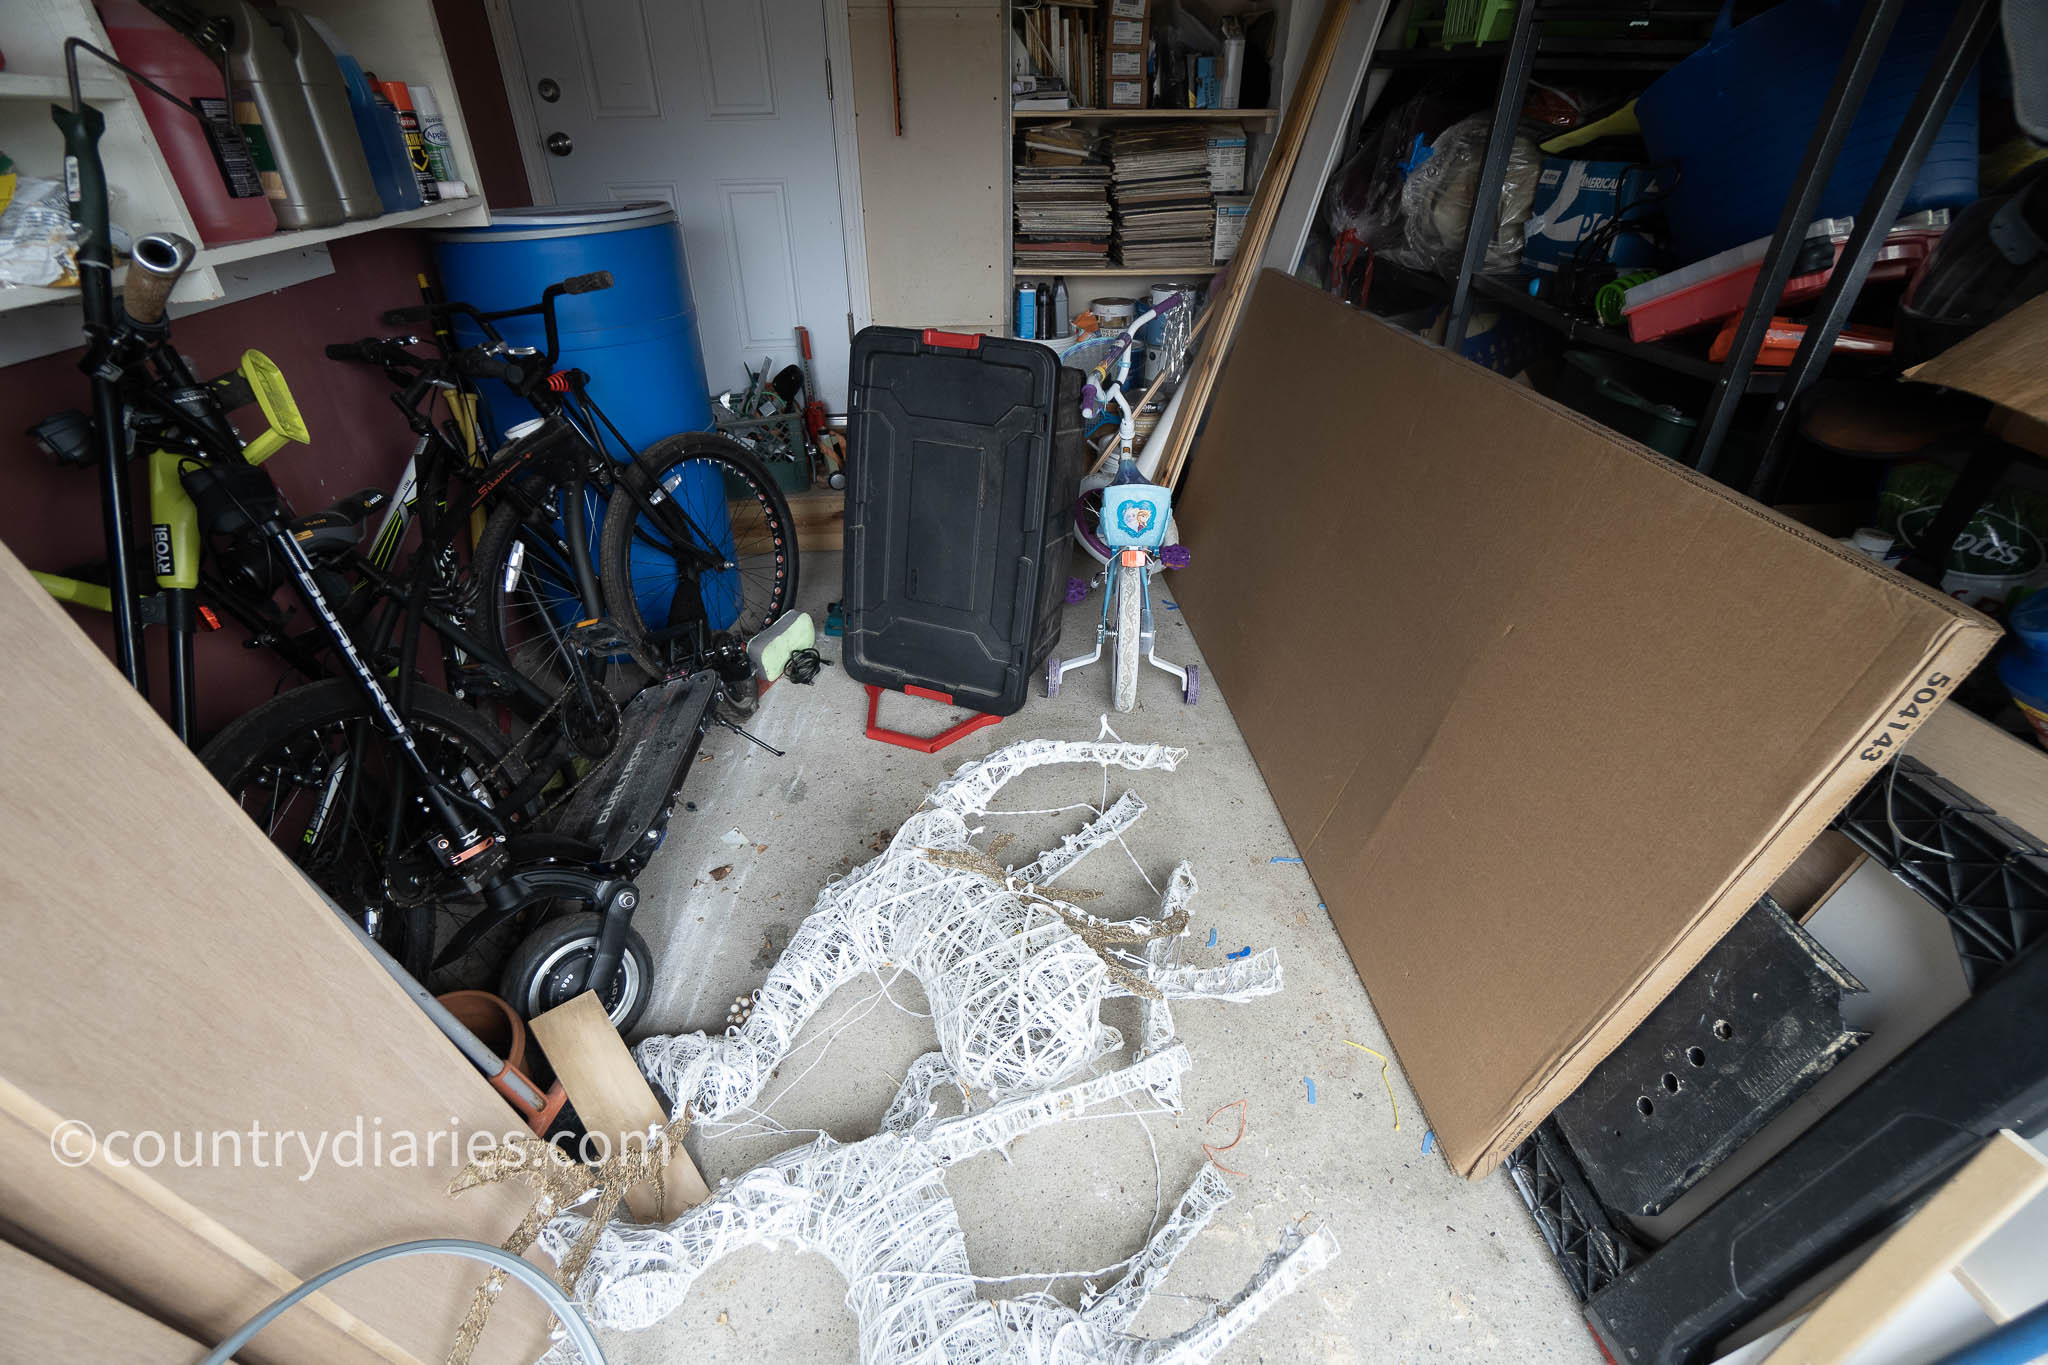 bins, bicycles and other things on garage floor